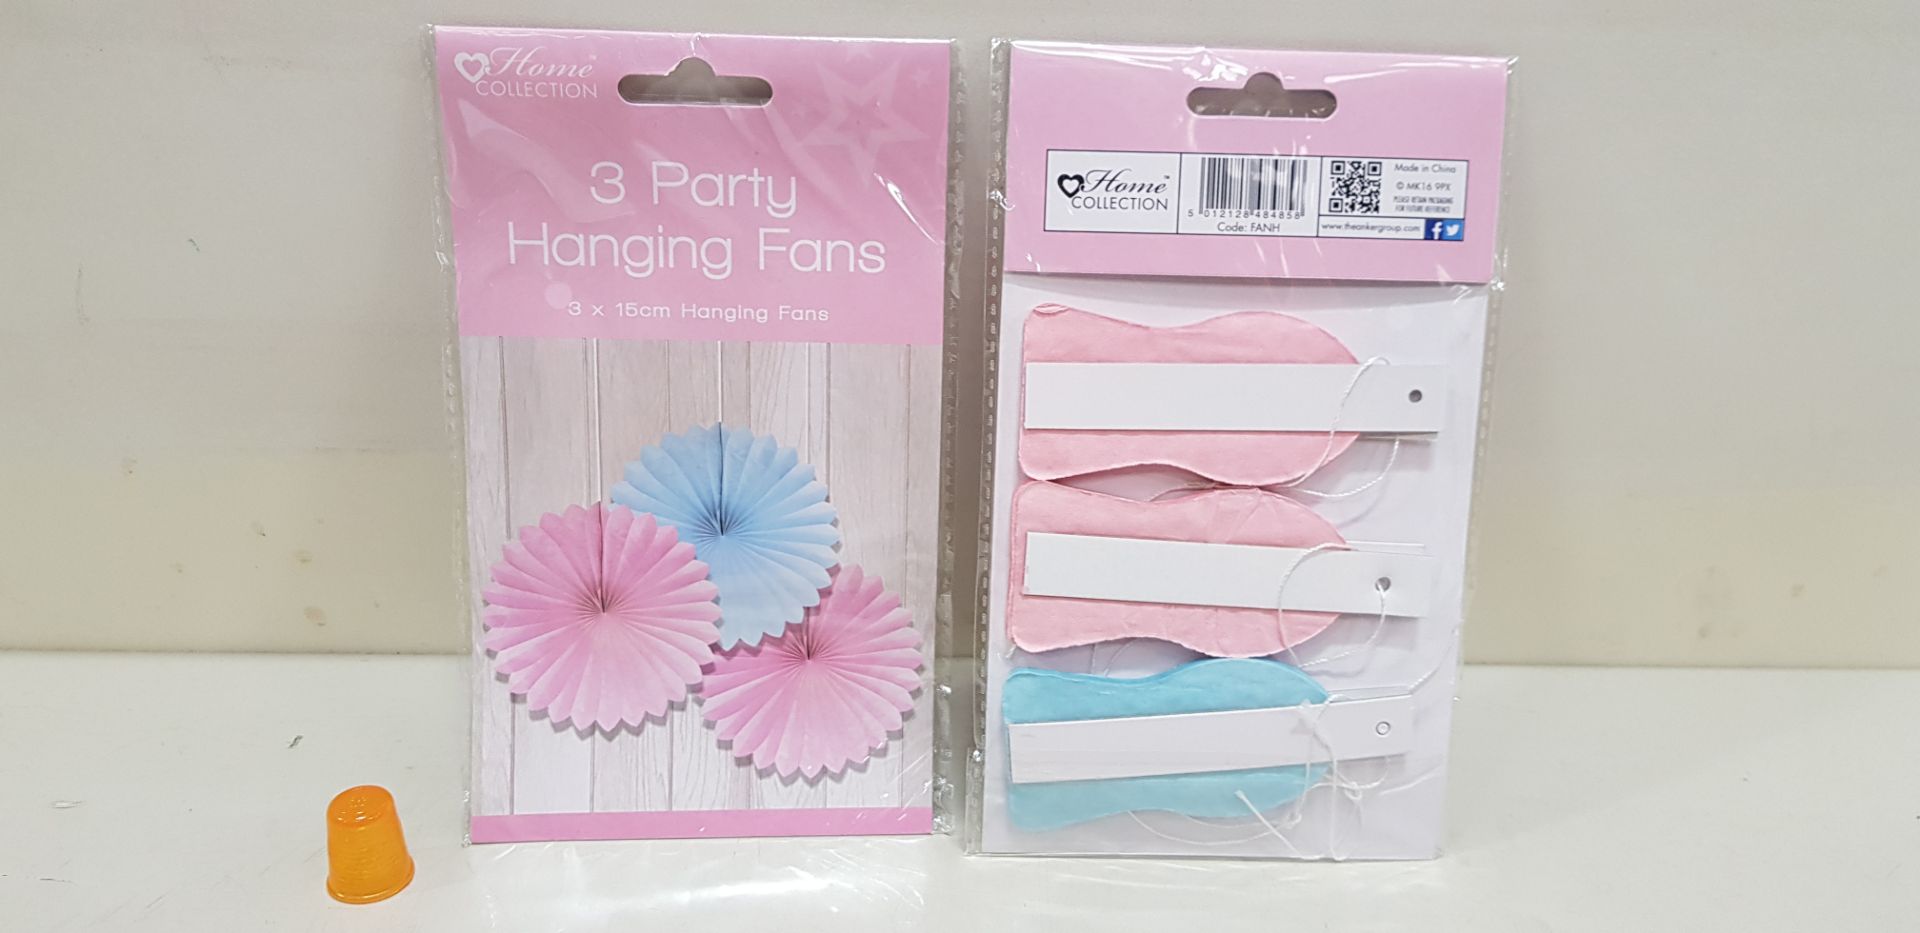 912 X BRAND NEW HOME COLLECTION 3 PARTY HANGING FANS (3 X 15CM) IN 19 BOXES